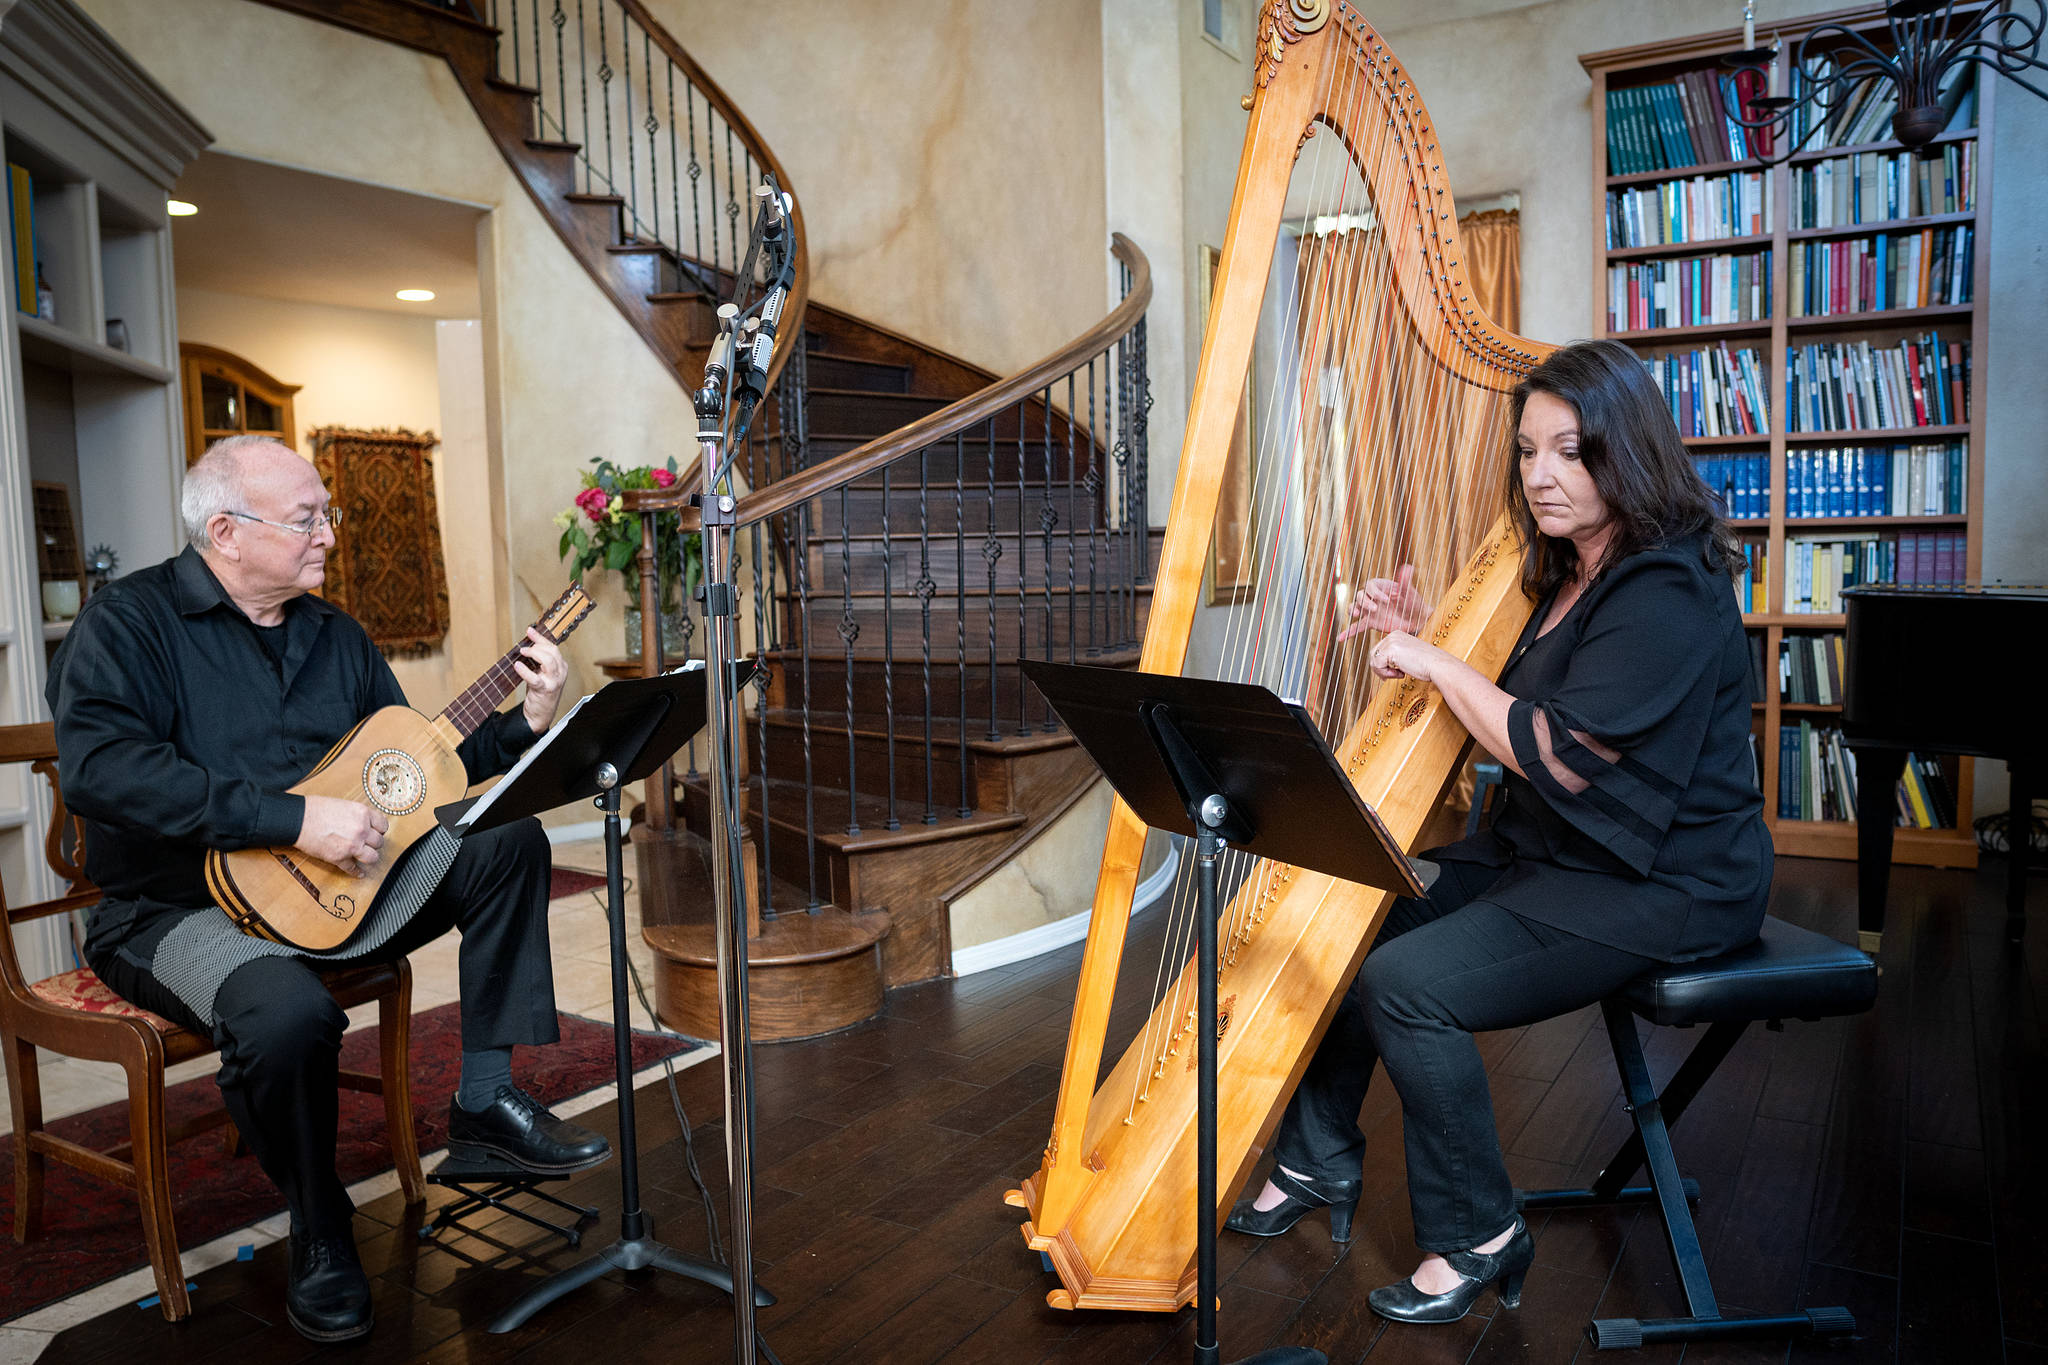 Harpist Maxine Eilander and guitarist Stephen Stubbs will be performing songs by Franz Schubert at this year’s Whidbey Island Music Festival. (Photo by Gary Payne)